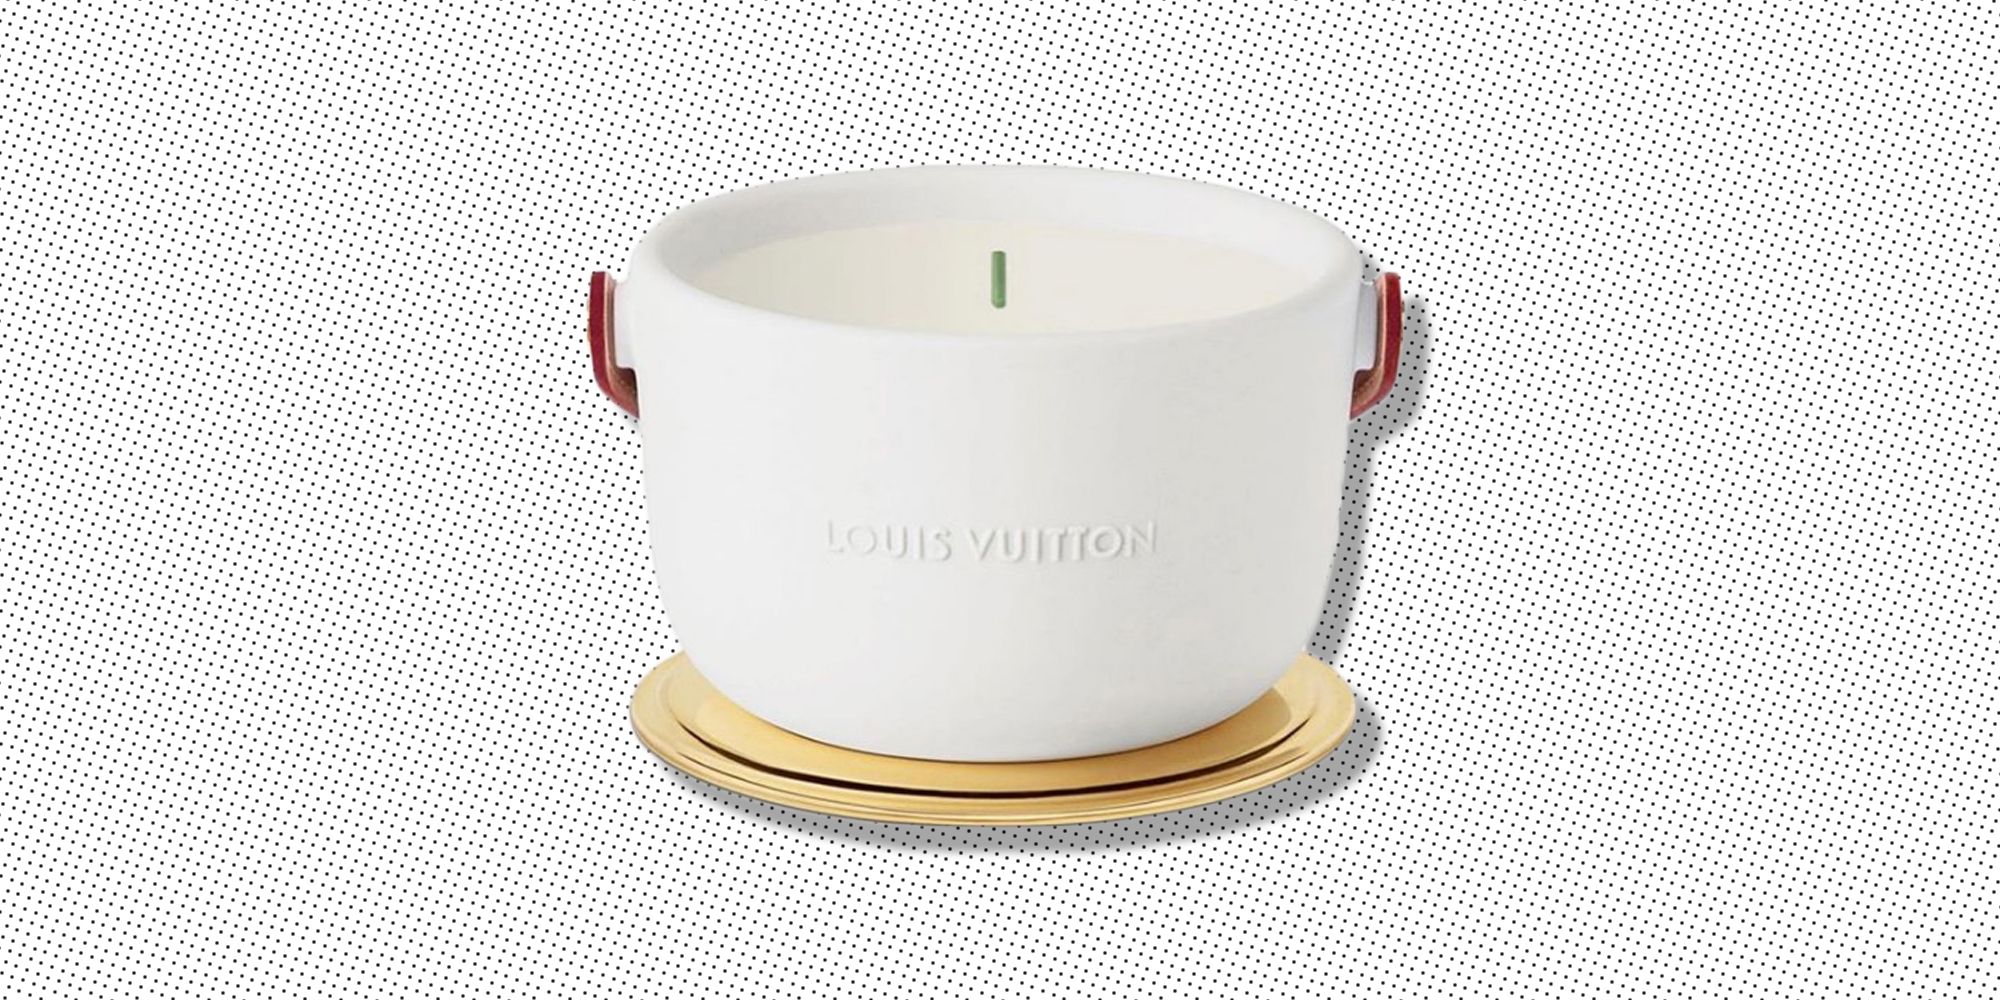 Louis Vuitton Just Invented The Handbag Candle And We Need One ASAP